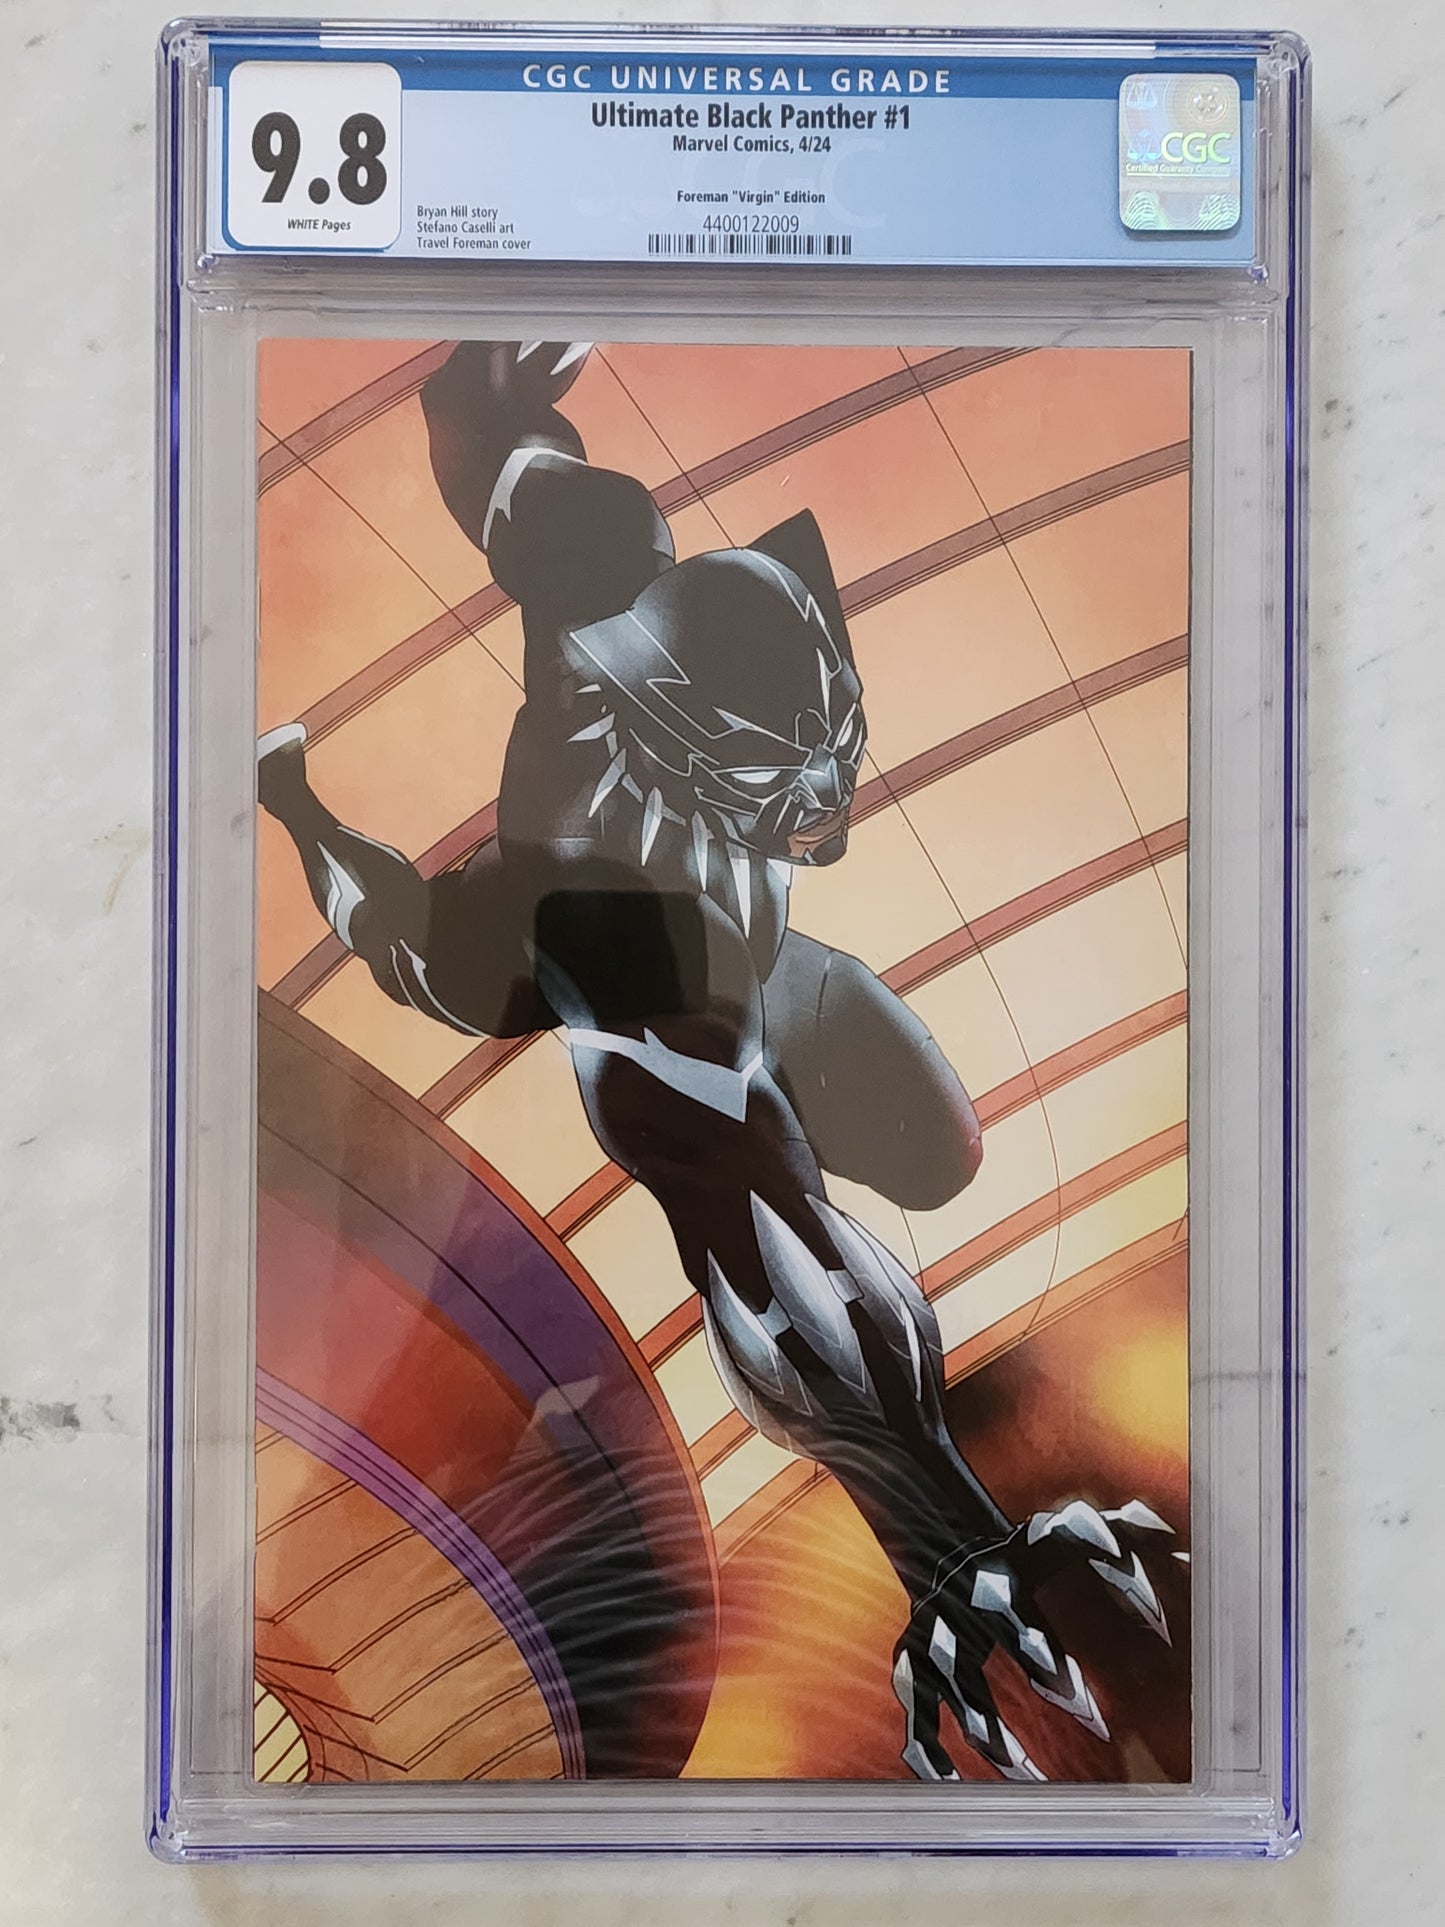 Ultimate Black Panther #1 | CGC 9.8 NM/MT | Foreman Virgin Cover Variant